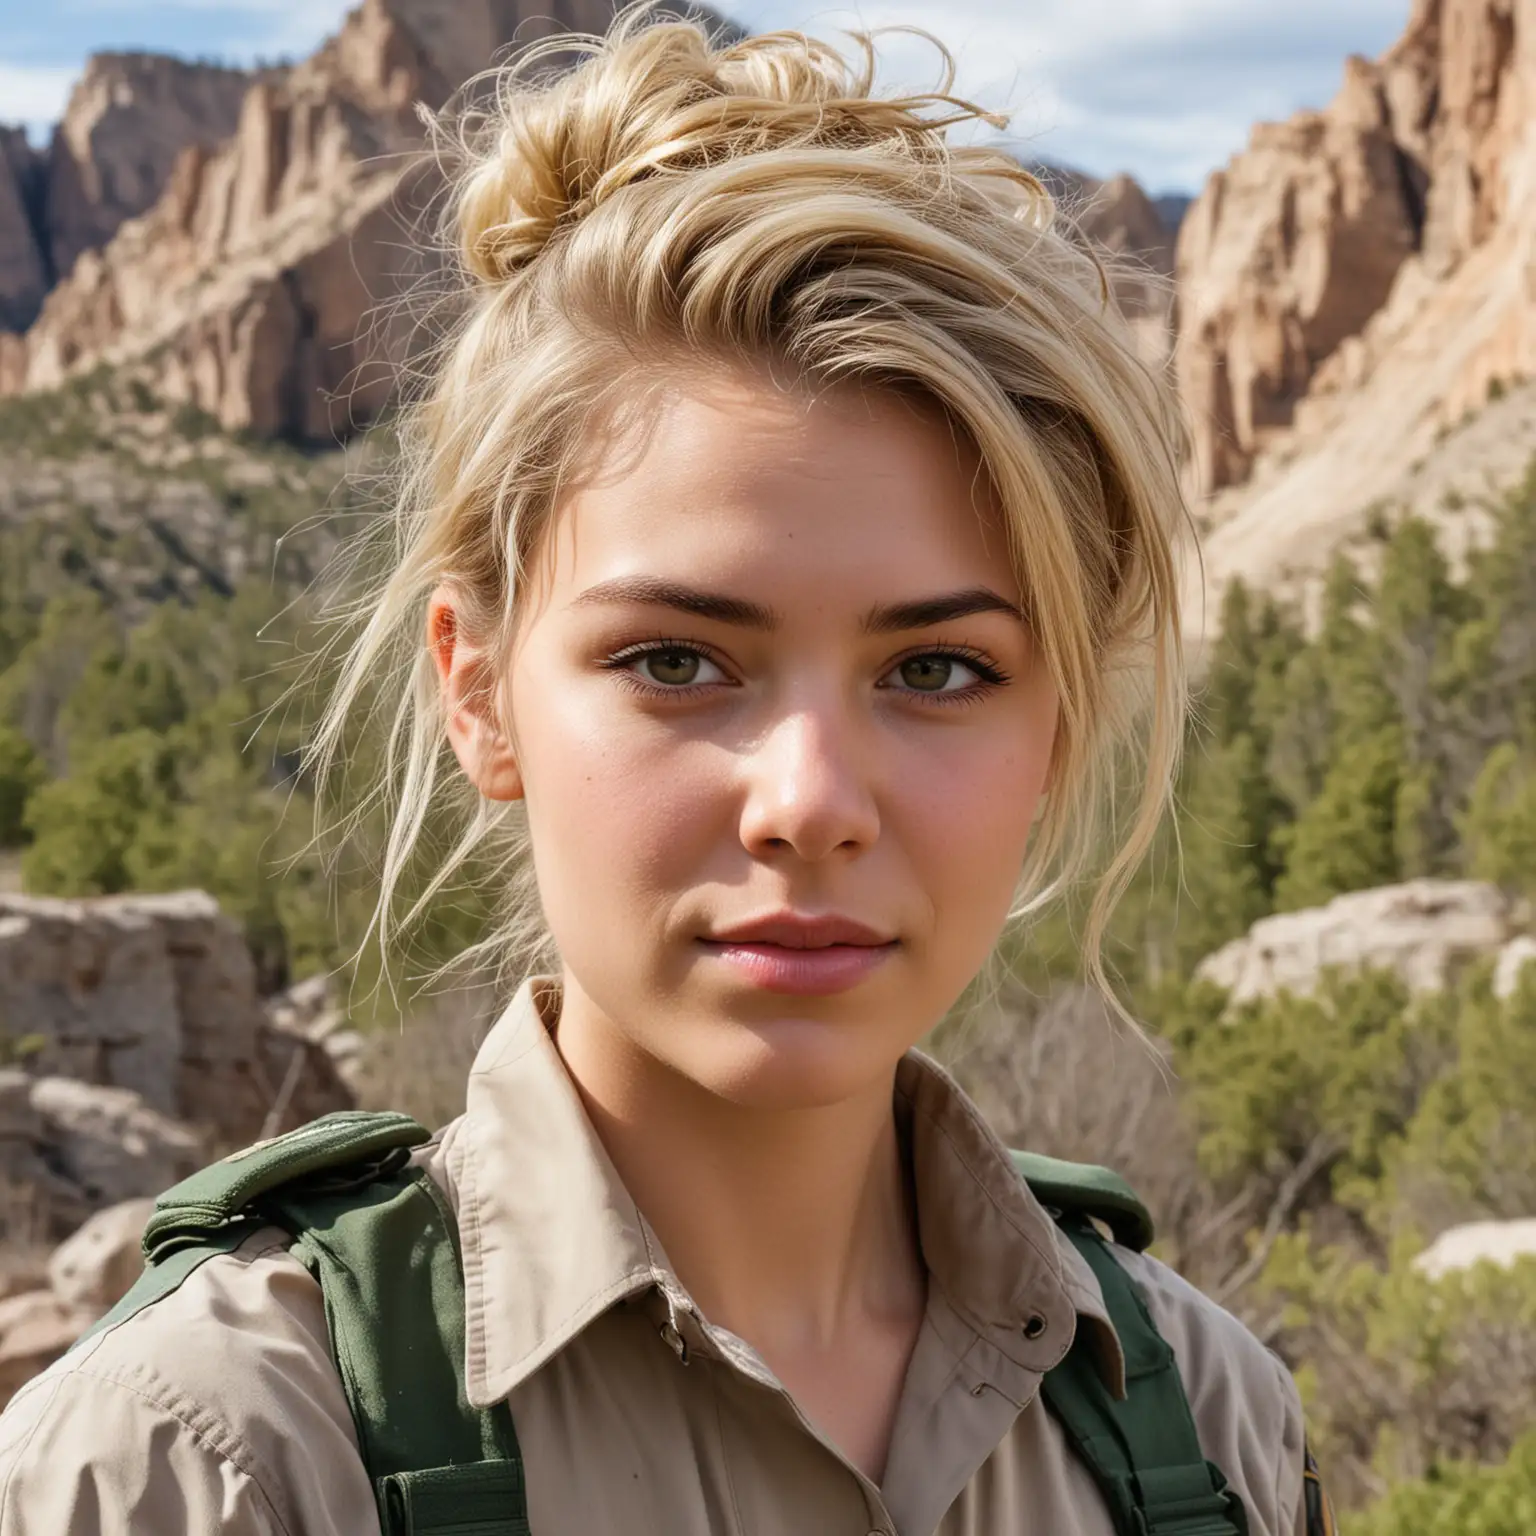 Head and shoulders image. An extremely attractive 23 year old park ranger, she wears her blonde hair in a messy updo. Background an American national park.